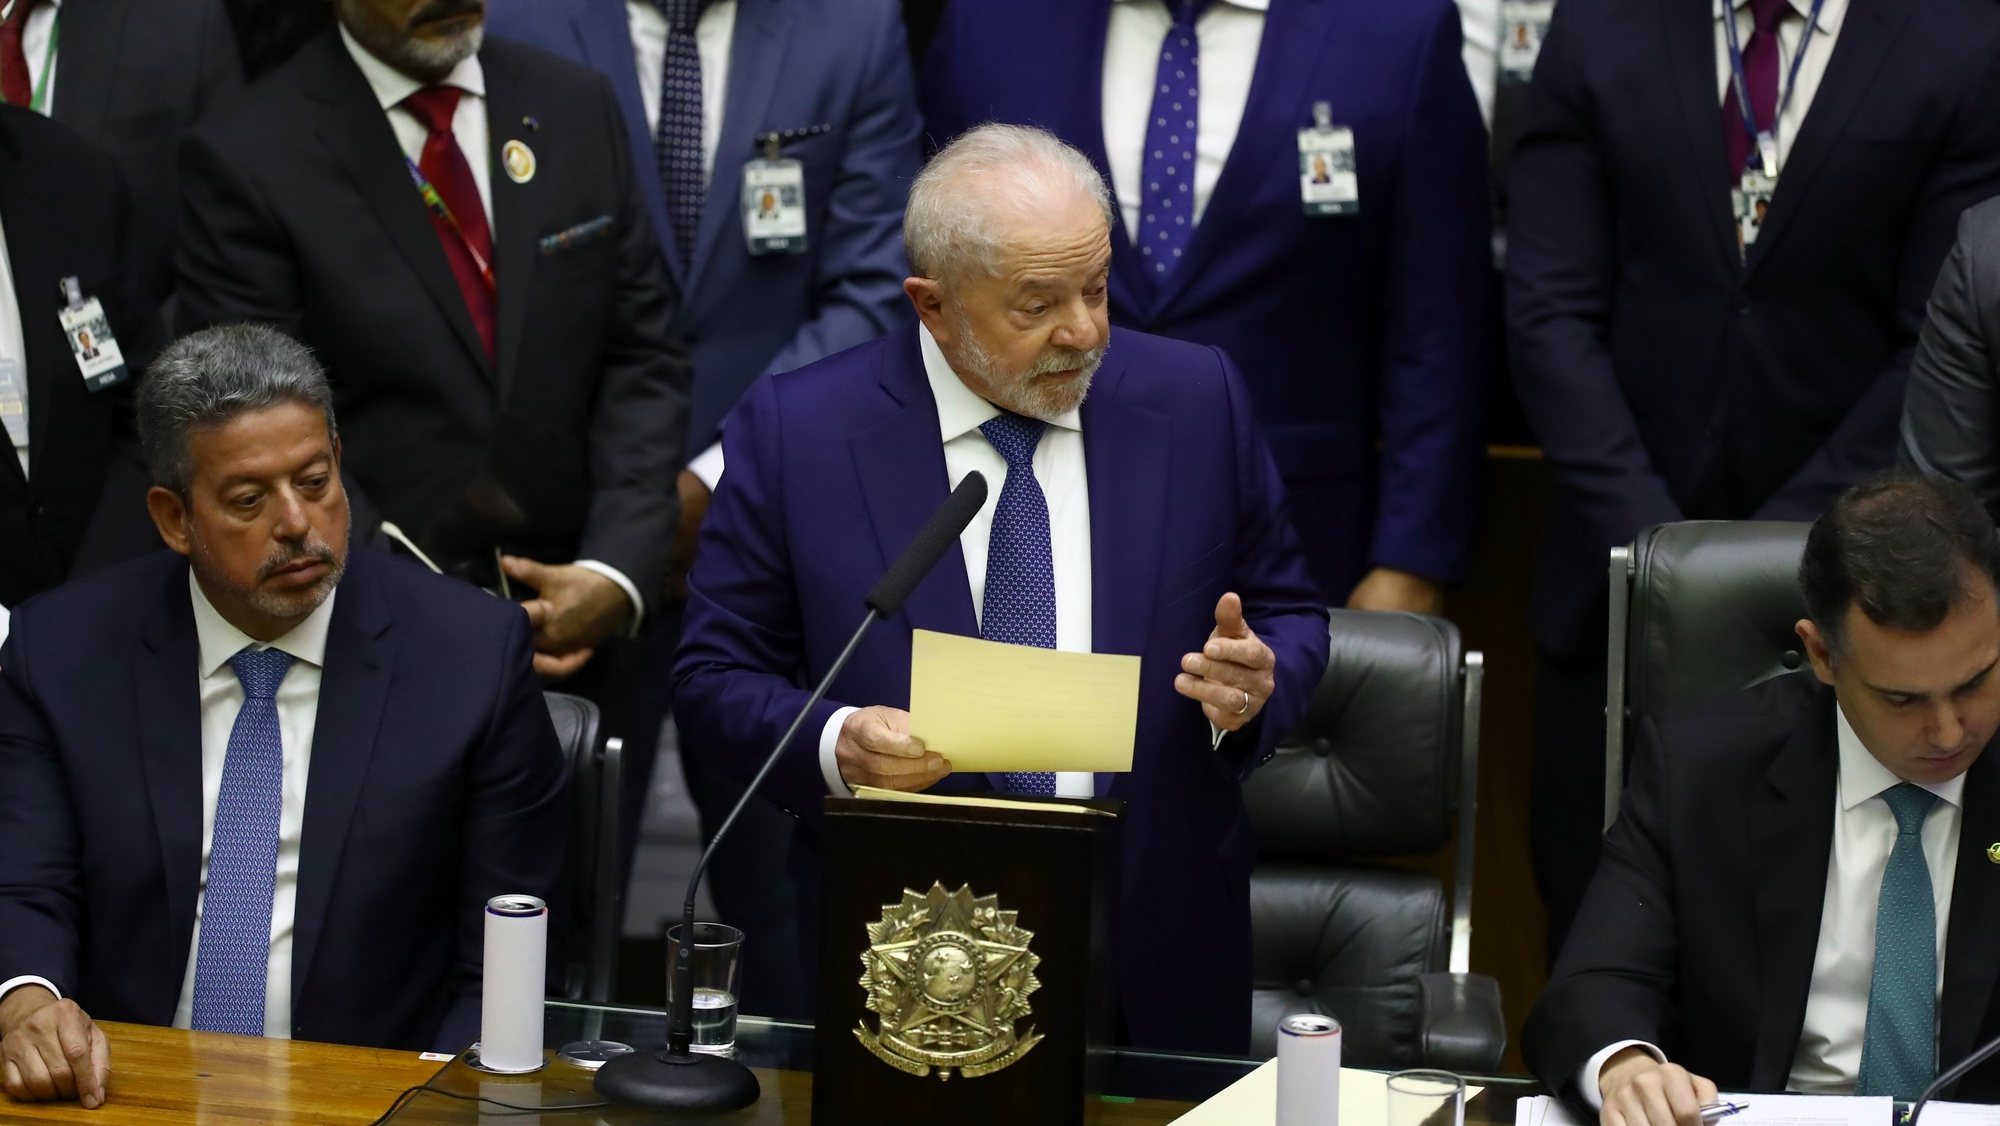 epa10385715 Brazil President Luiz Inacio Lula da Silva (C) delivers a speech before Parliament during his inauguration in Brasilia, Brazil, 01 January 2023. Lula was sworn in for his third term as President of Brazil after winning the October 2022 general elections.  EPA/Jarbas Oliveria